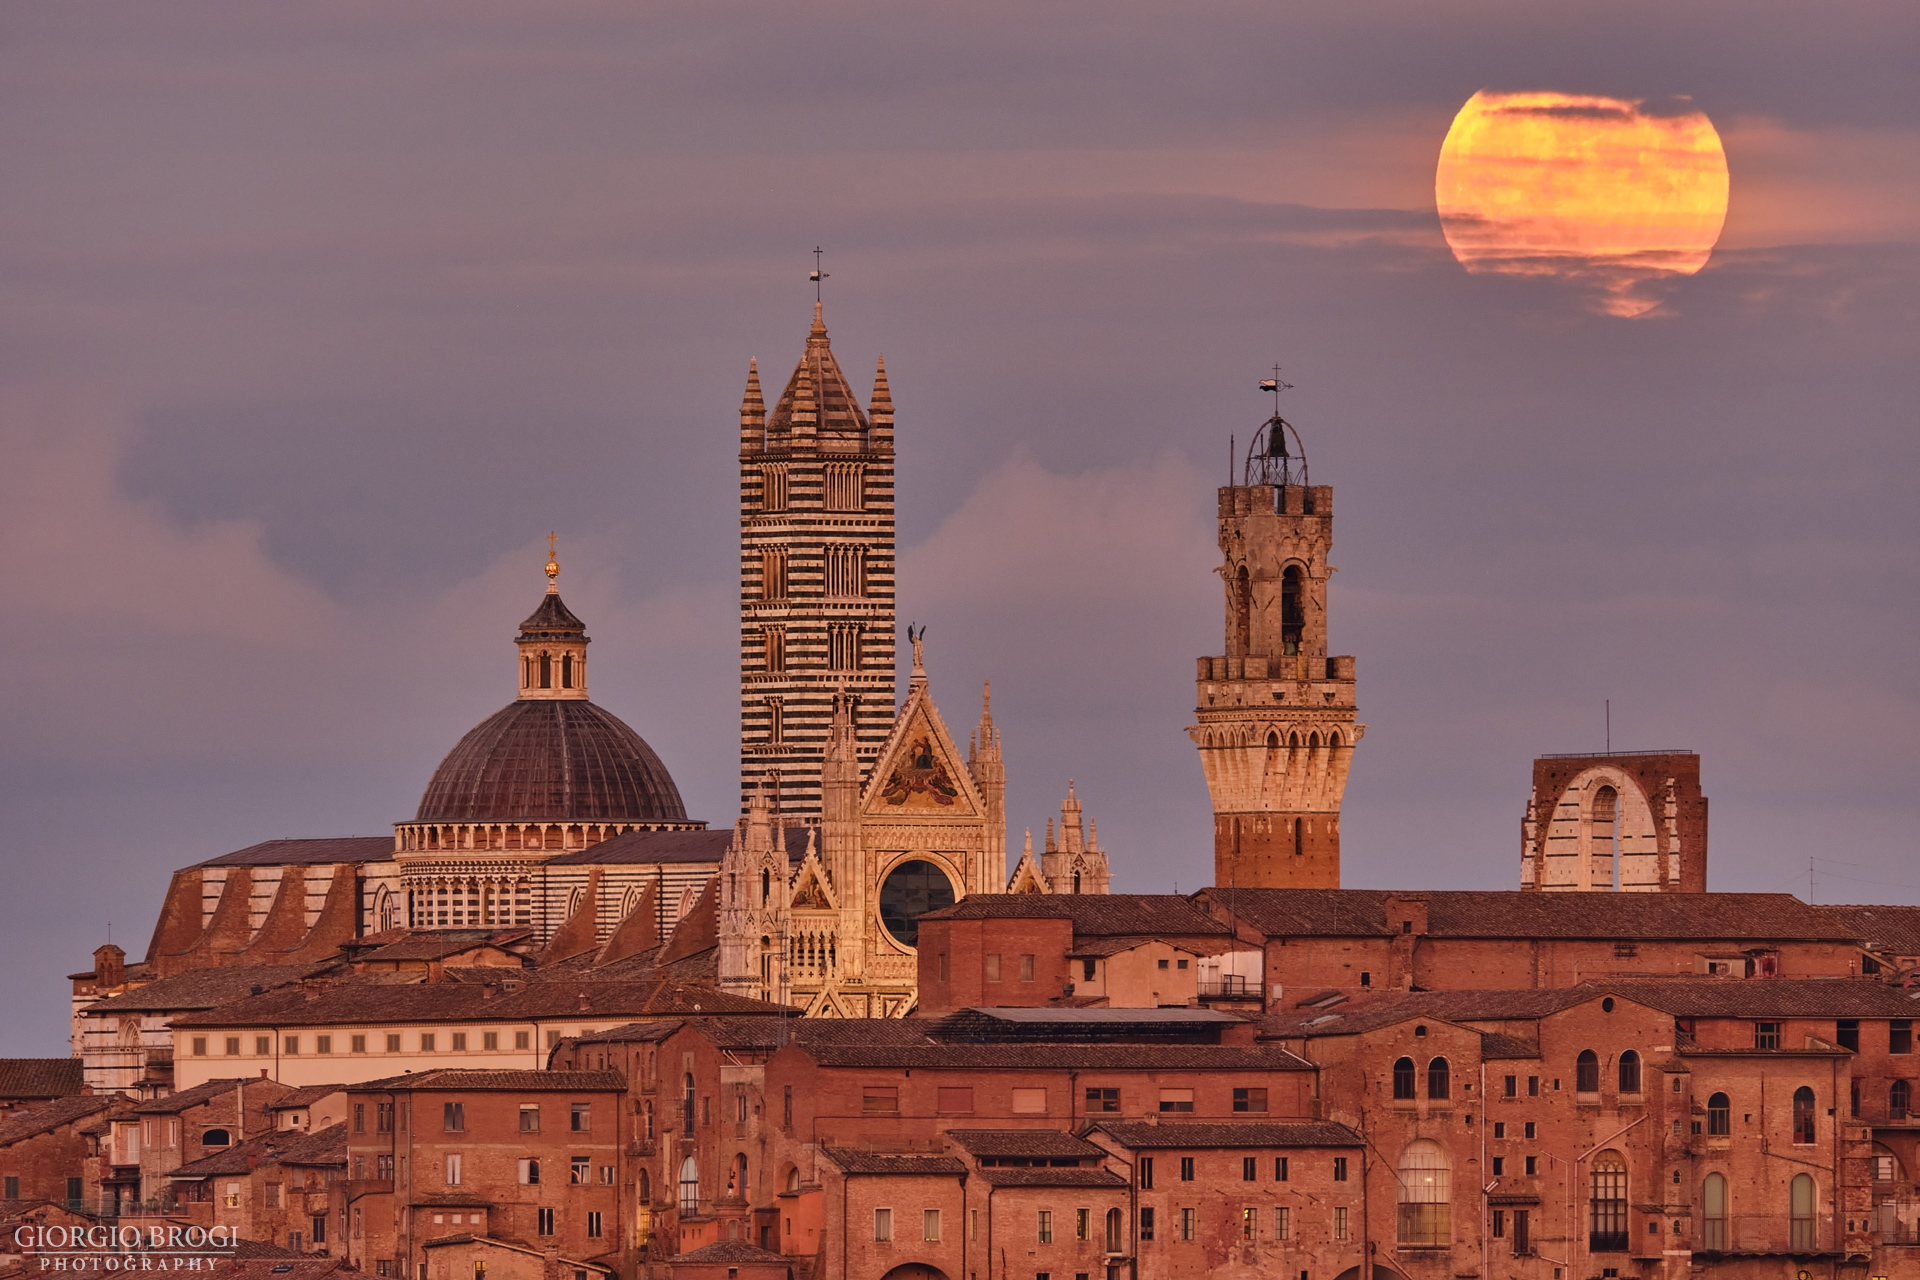 The full moon shines over Siena...